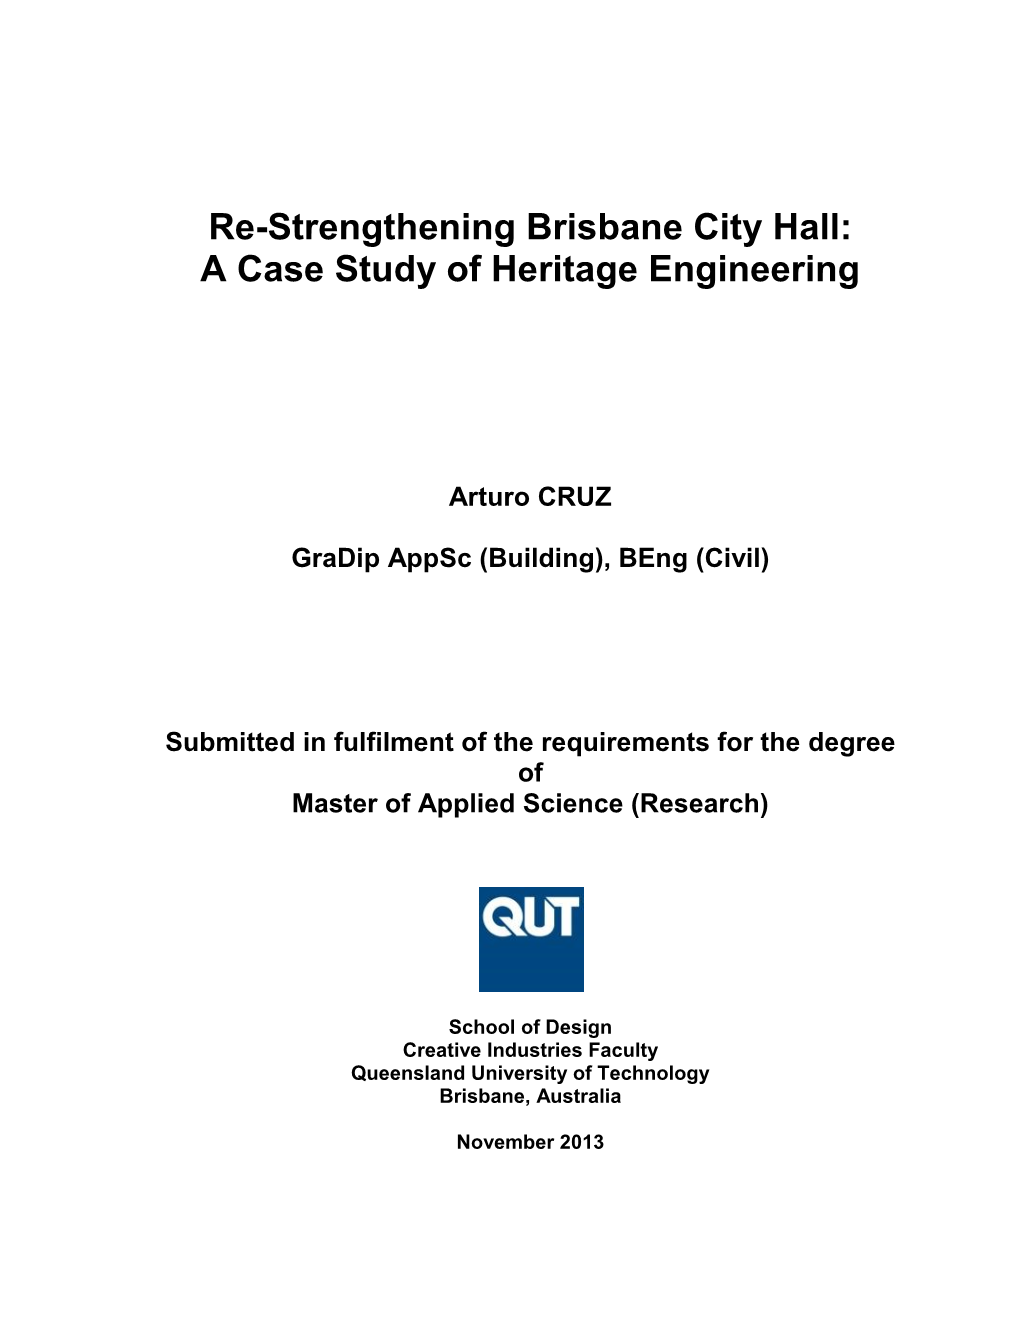 Re-Strengthening Brisbane City Hall: a Case Study of Heritage Engineering